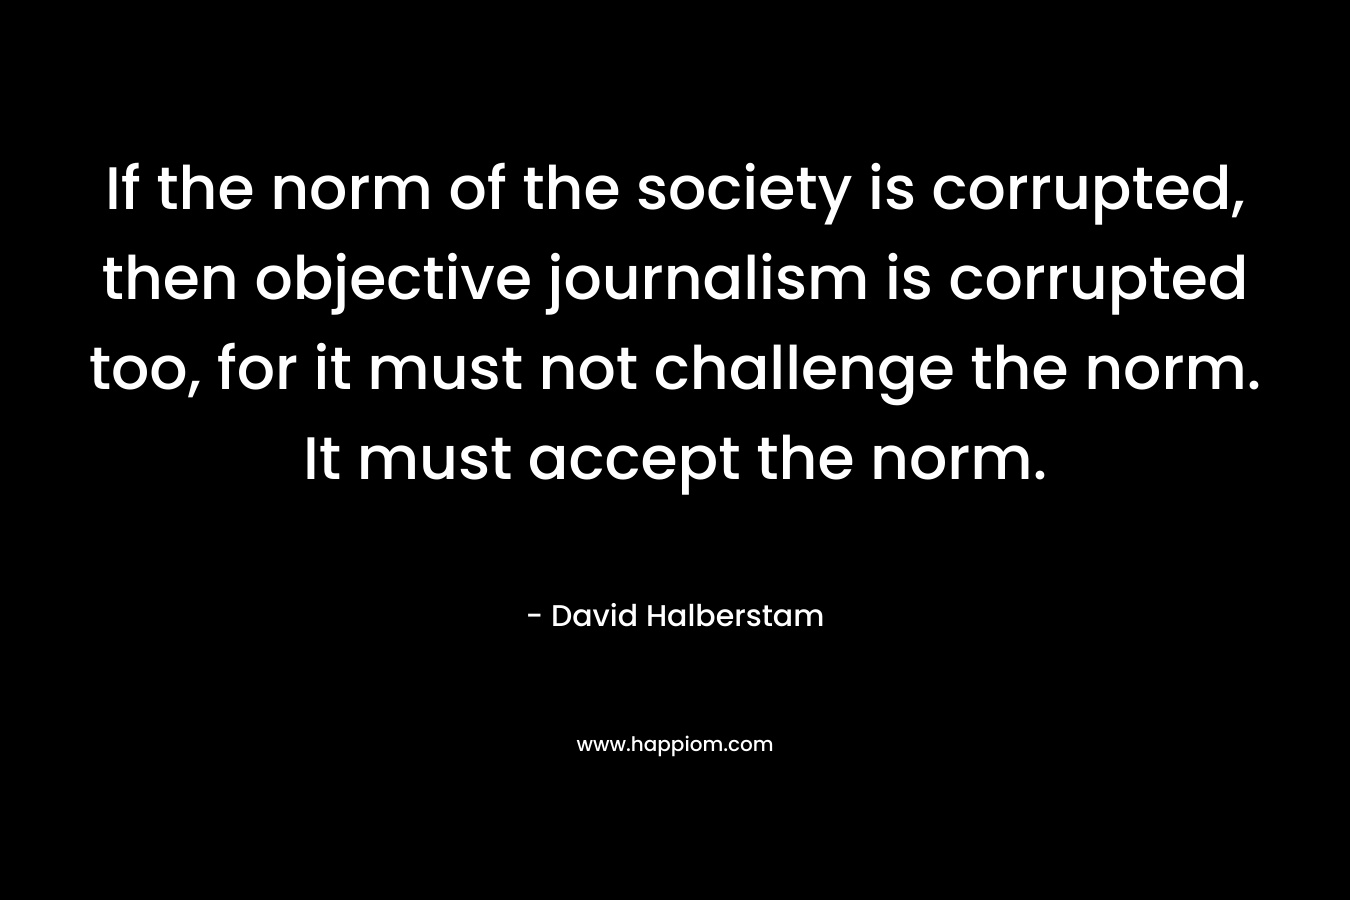 If the norm of the society is corrupted, then objective journalism is corrupted too, for it must not challenge the norm. It must accept the norm.